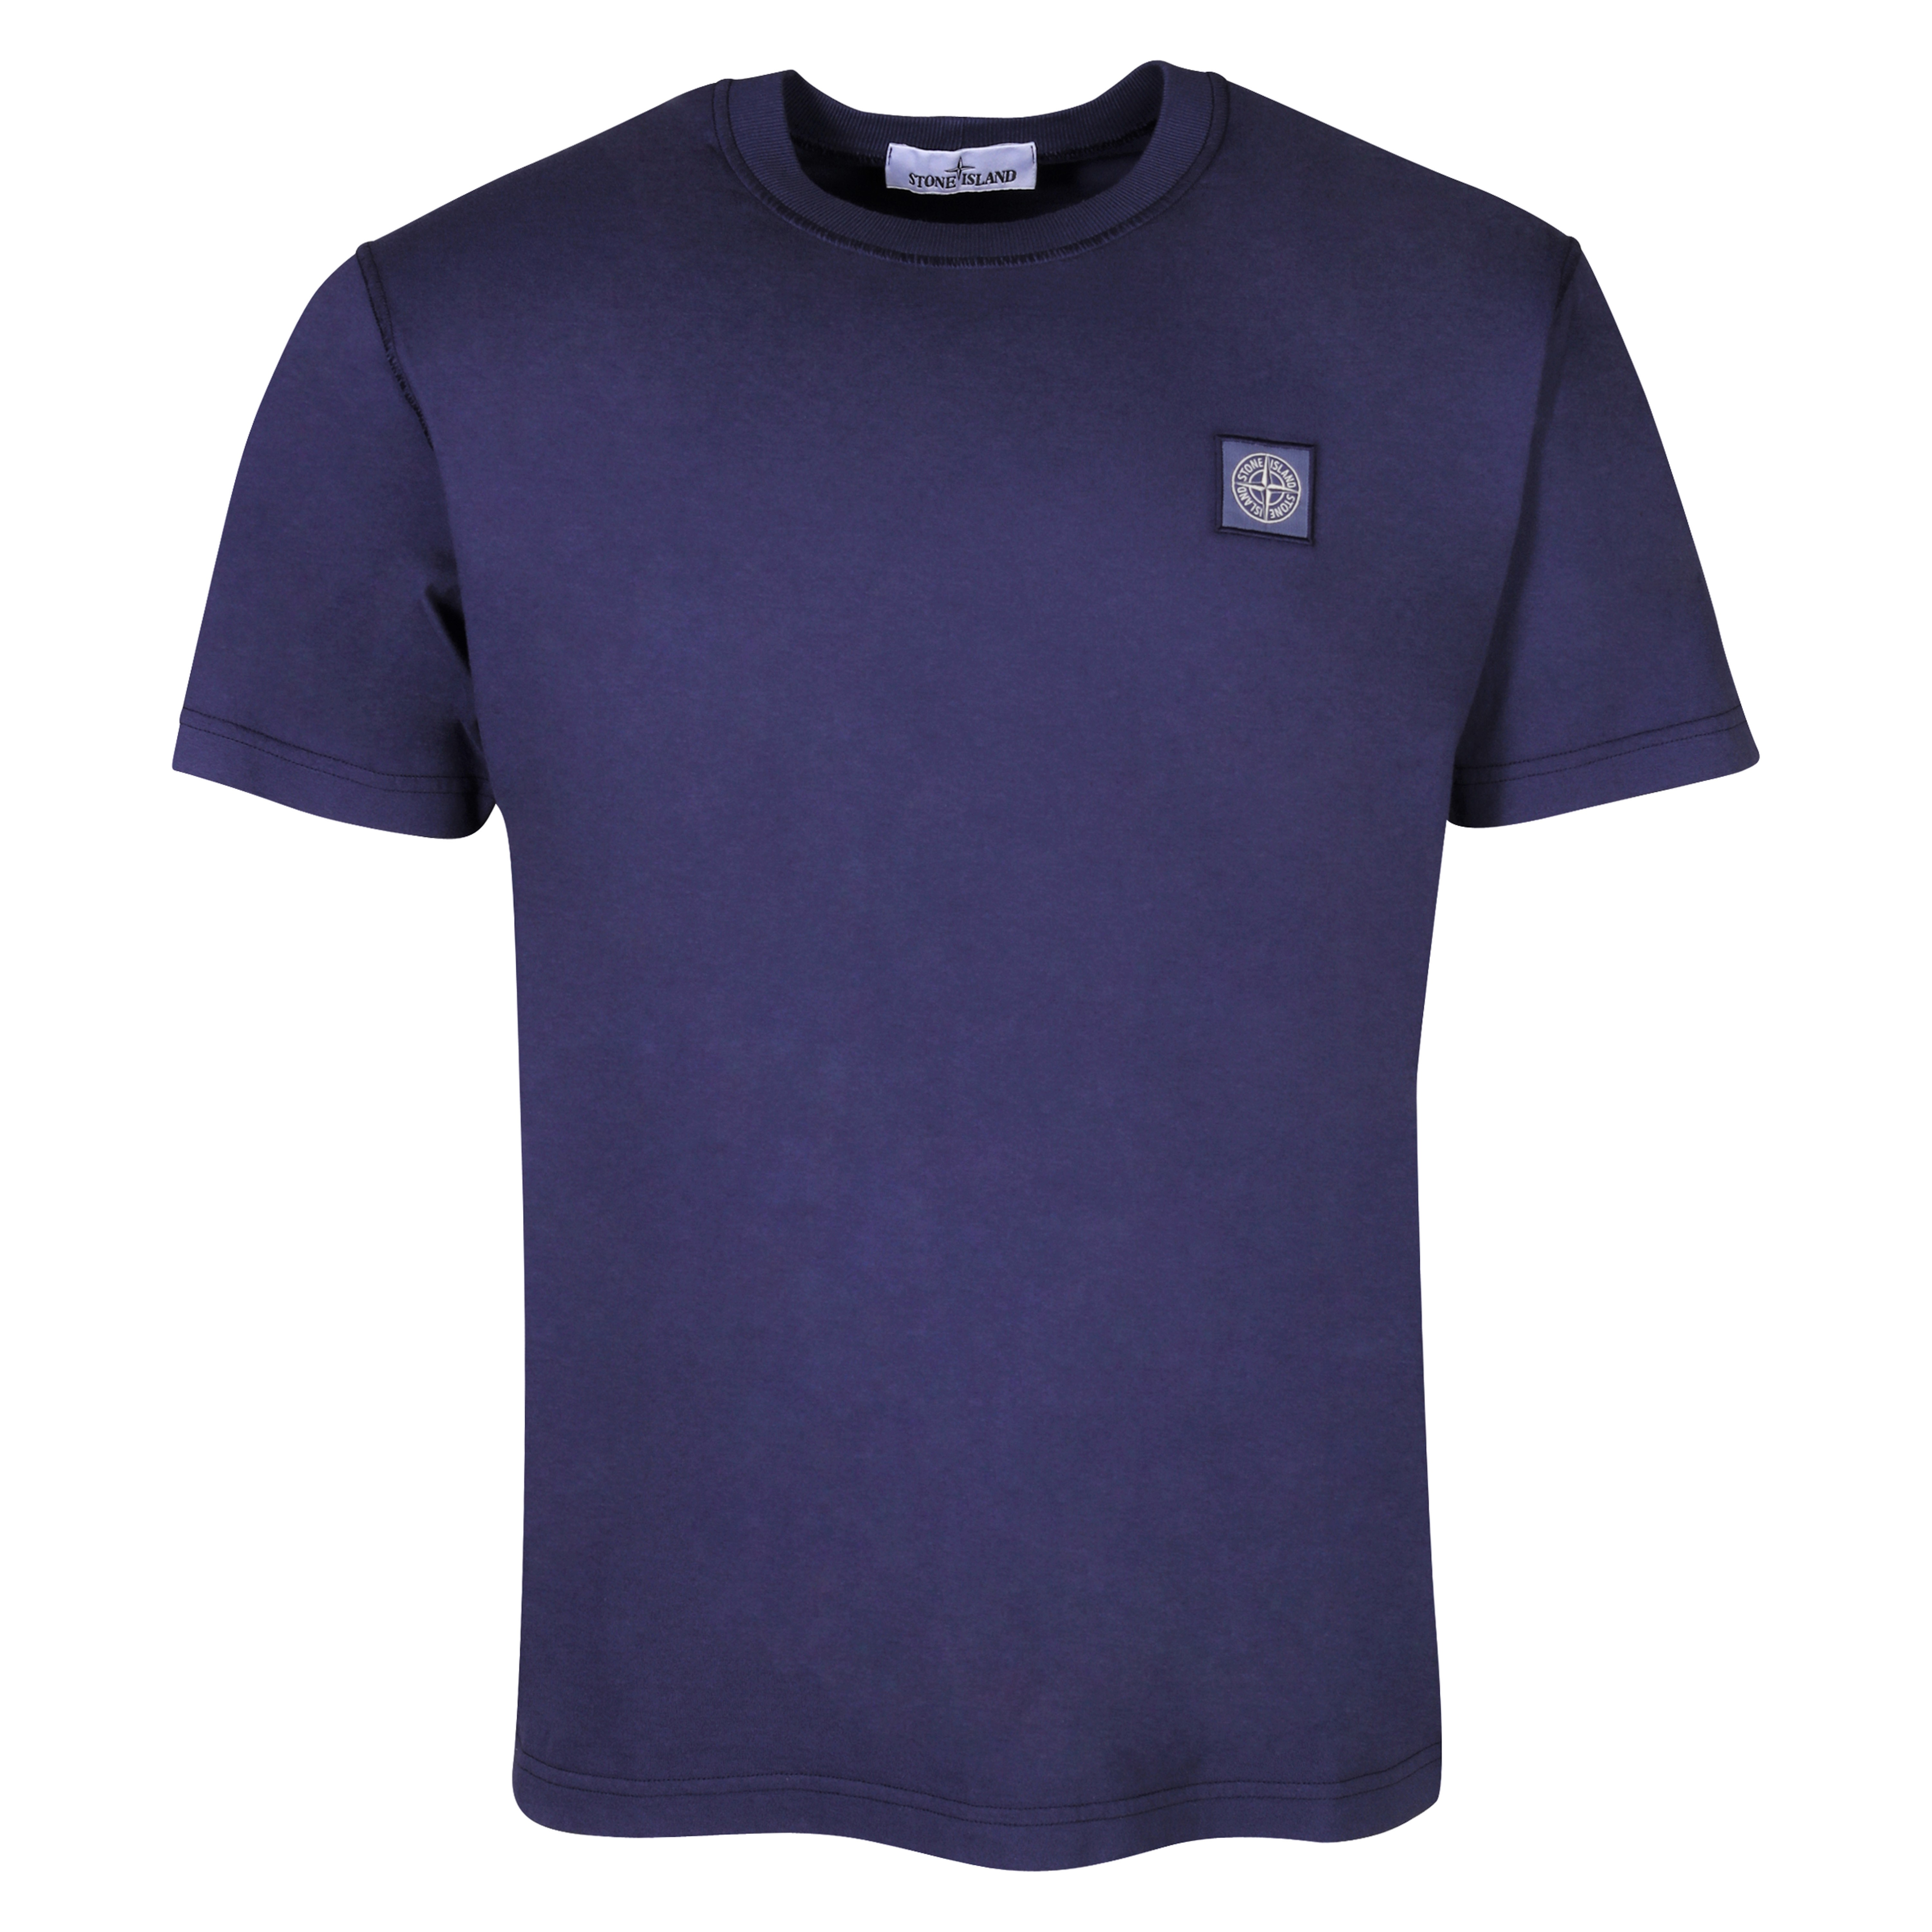 Stone Island T-Shirt in Royal Blue S